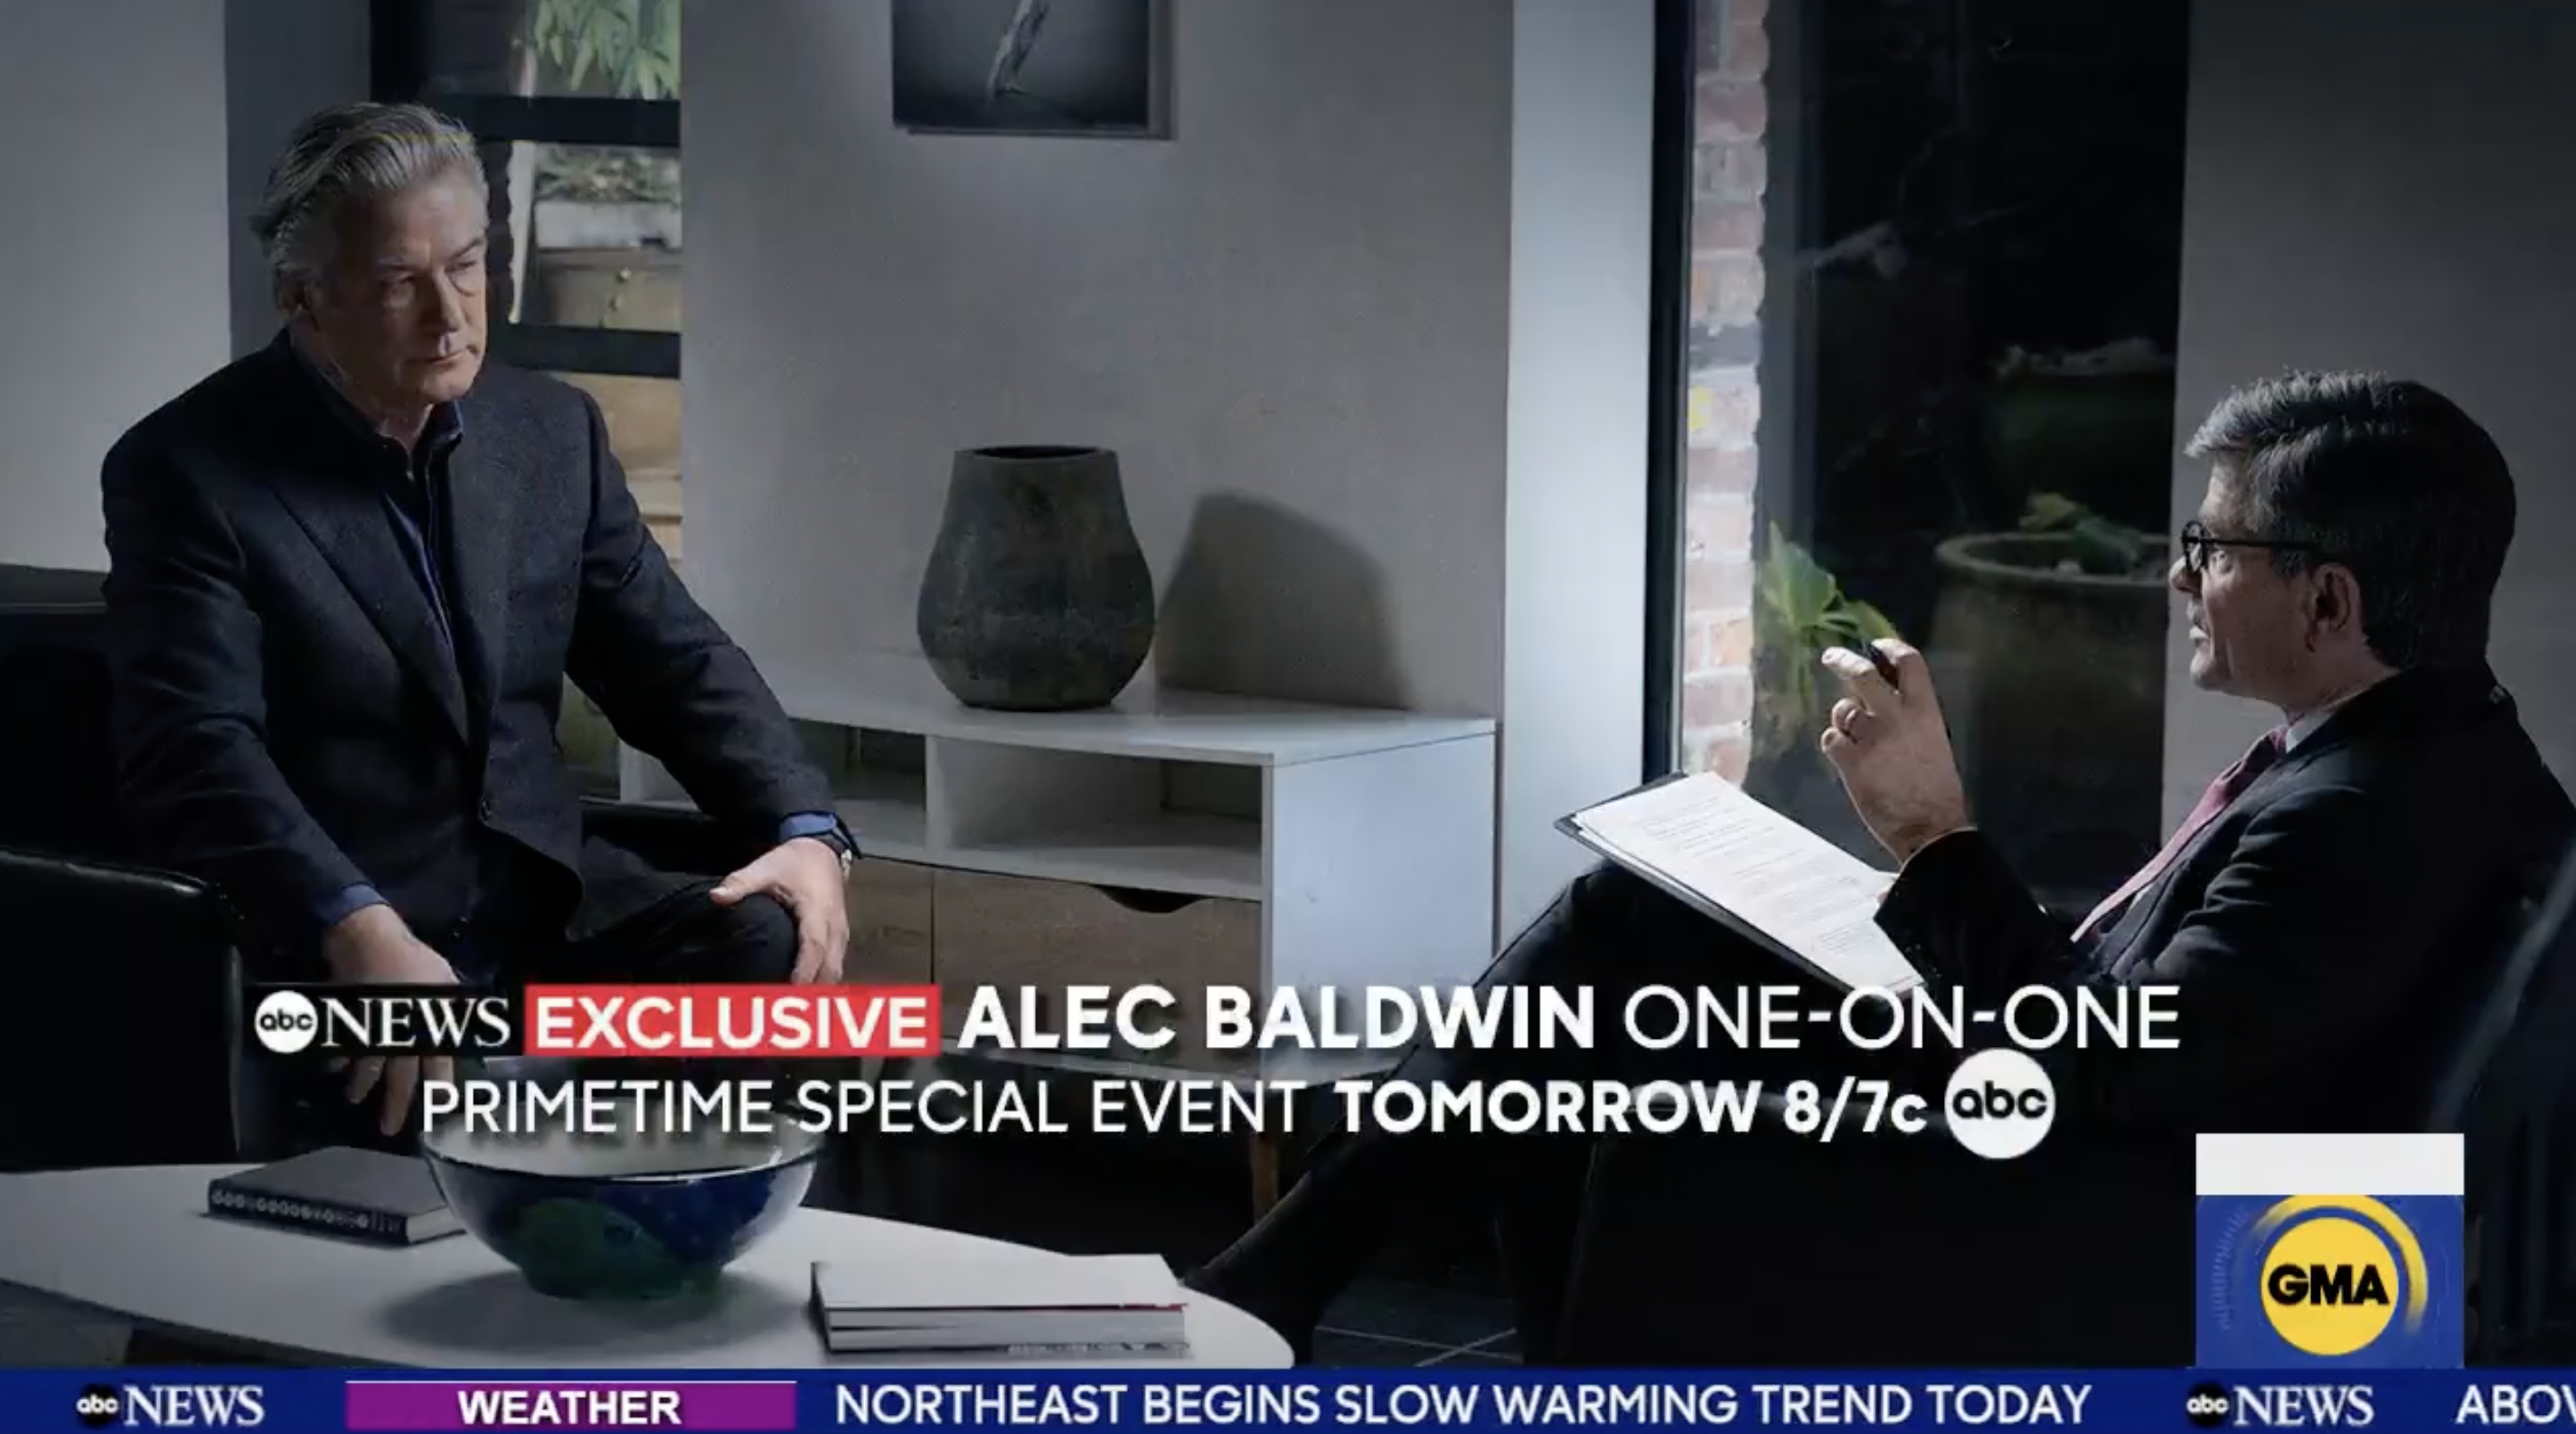 Alec Baldwin and George Stephanopoulos